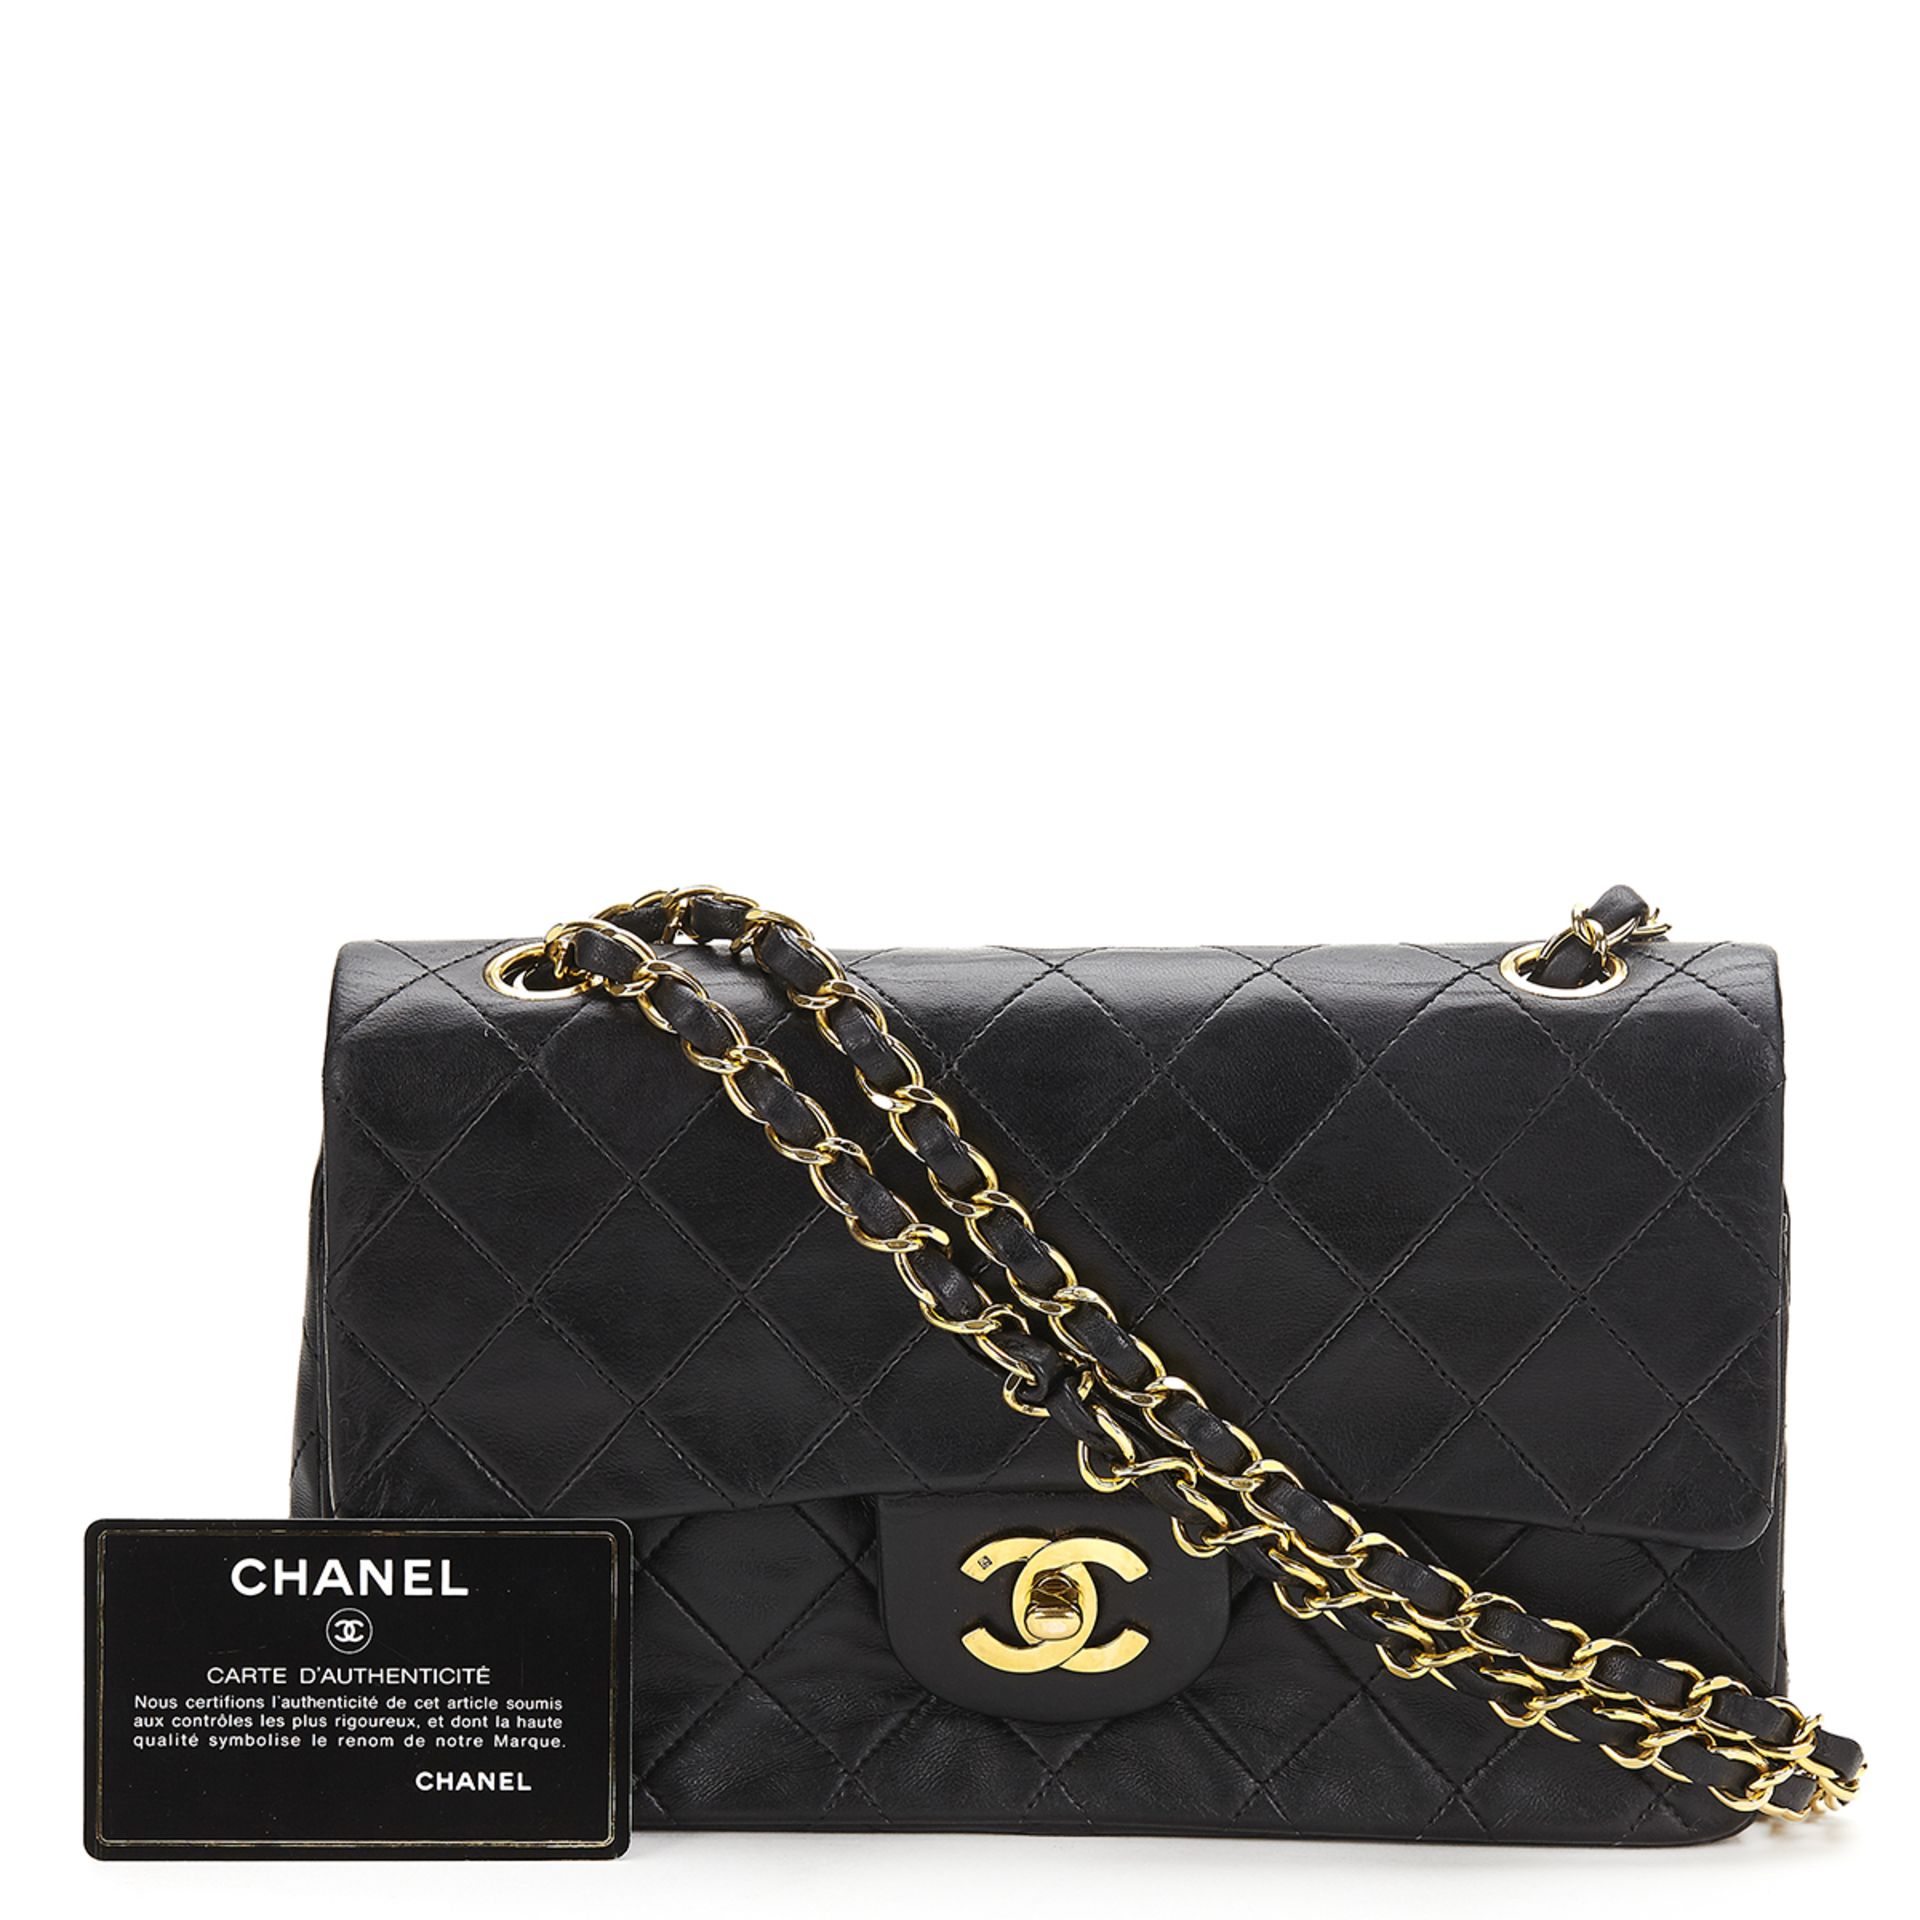 Chanel, Small Classic Double Flap Bag - Image 9 of 9